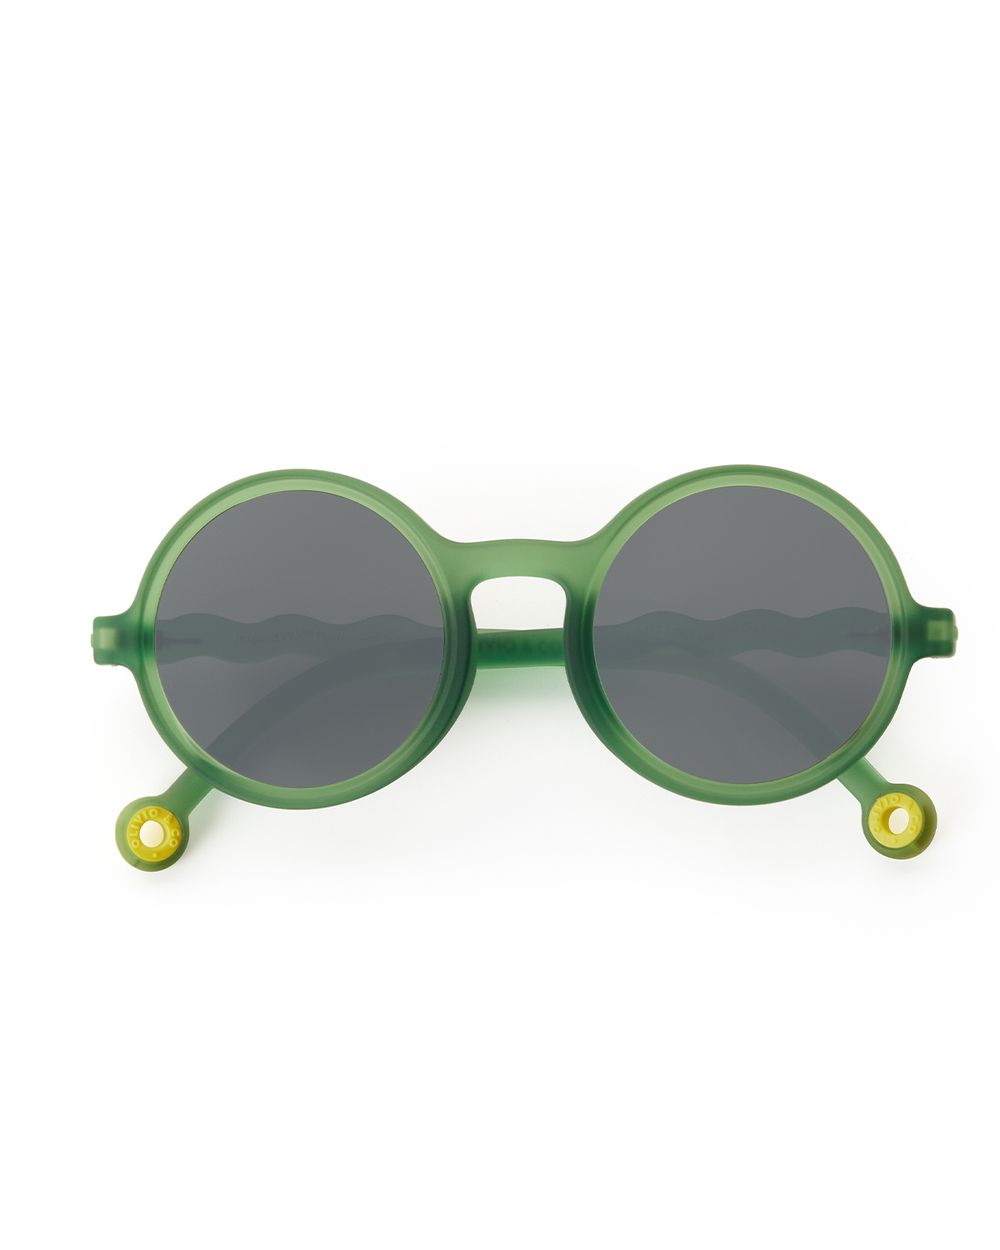 Kids Round Sunglasses Olive Green with Polarized